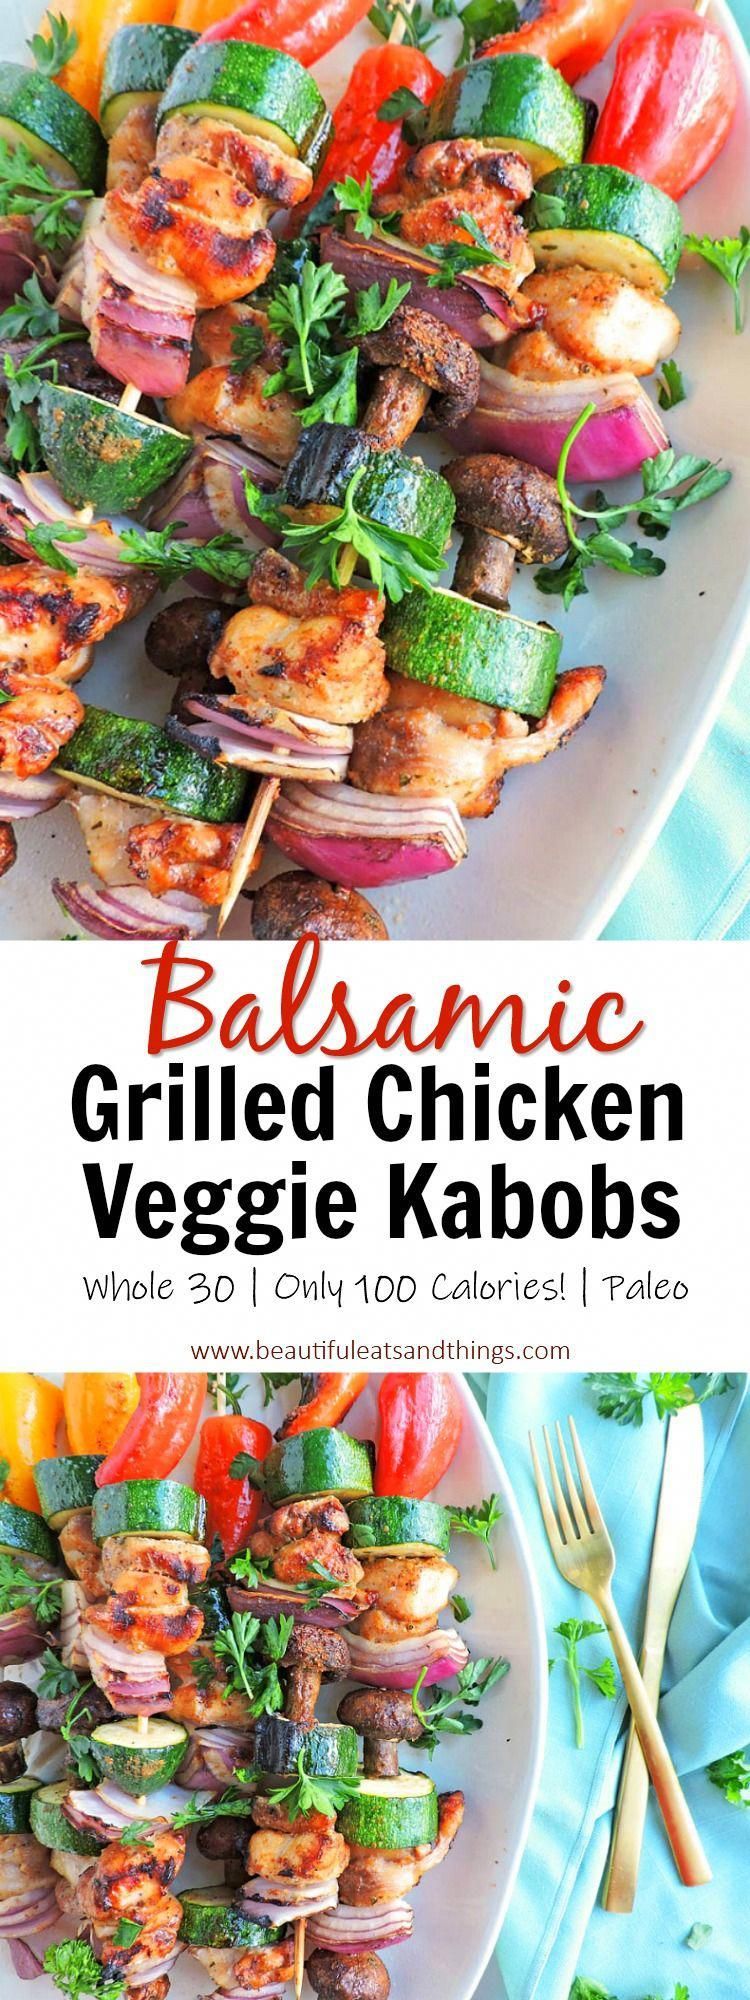 Grilled Balsamic Chicken and Veggie Kabobs - Beautiful Eats & Things -   18 healthy recipes For Weight Loss clean eating ideas